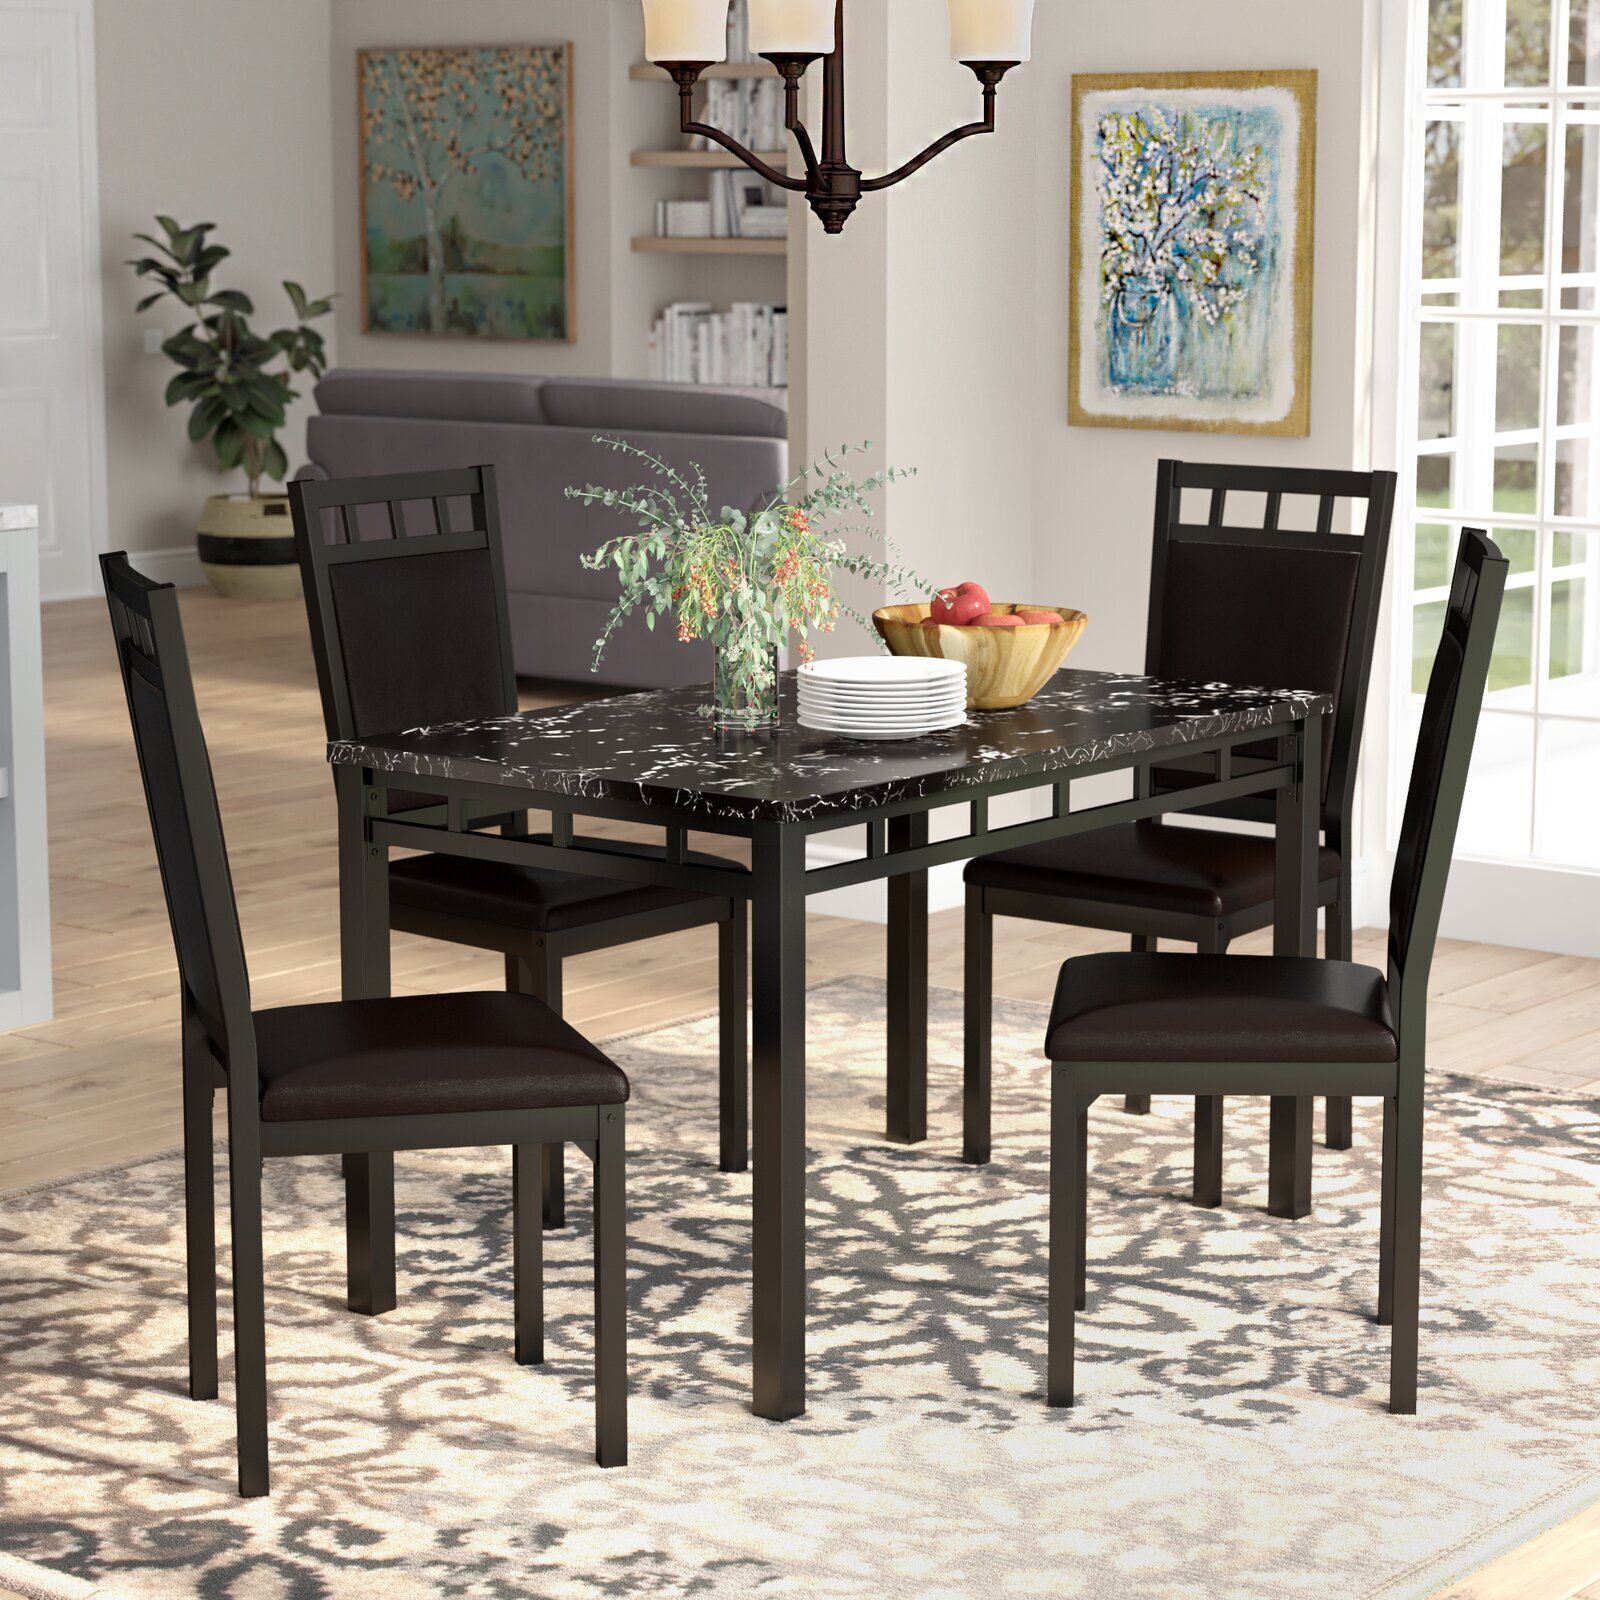 Black marble dining table set for traditional spaces